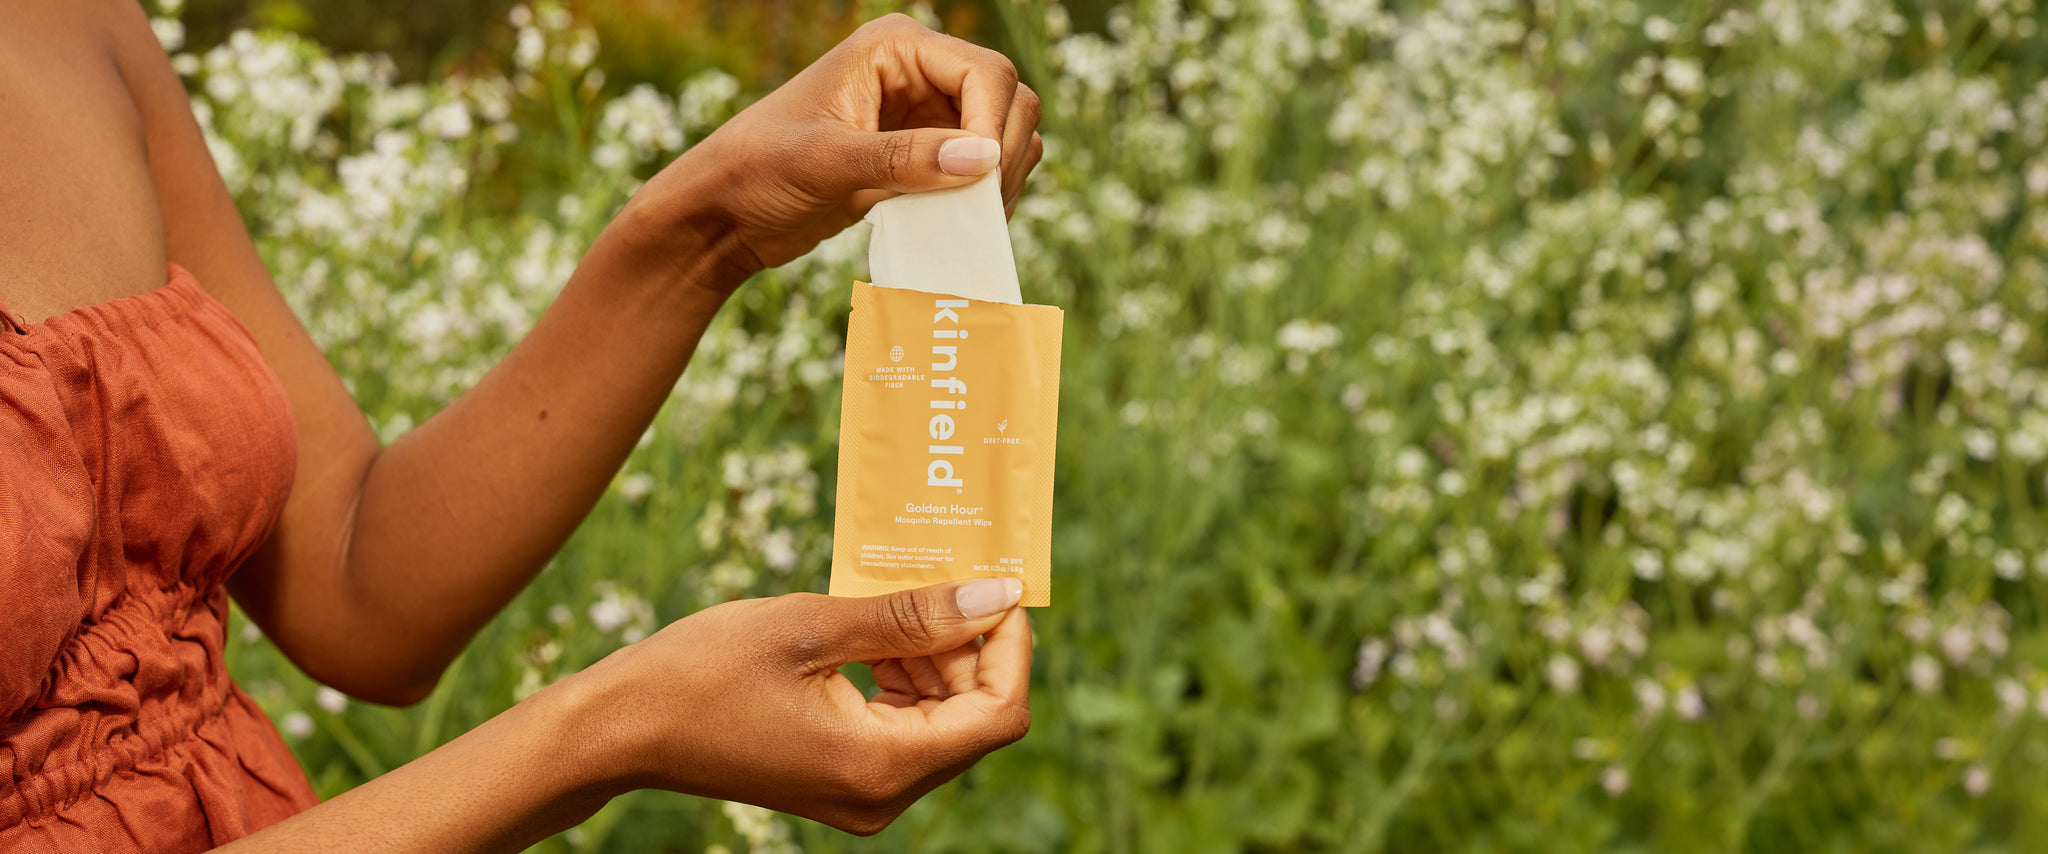 A women's hands open an orange Golden Hour Wipe packet and pulls out the biodegradable repellent wipe in front of greenery.